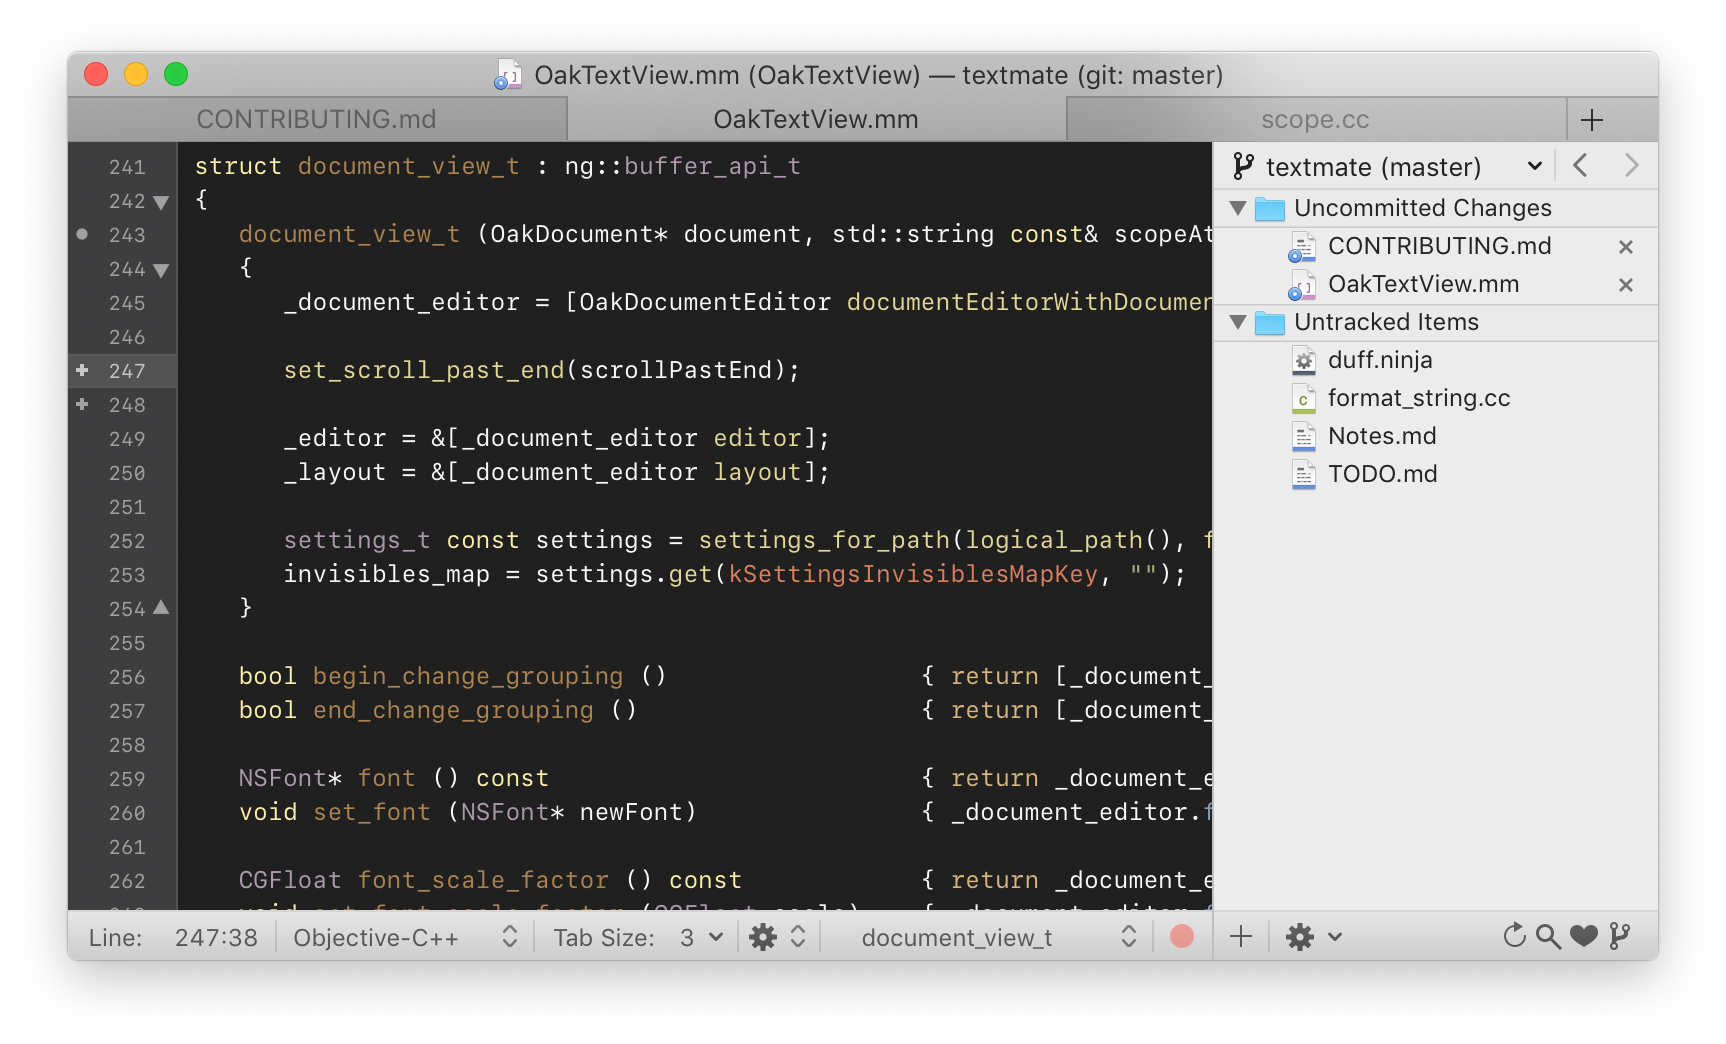 TextMateTextMate is a graphical text editor for macOS 10.12 or later